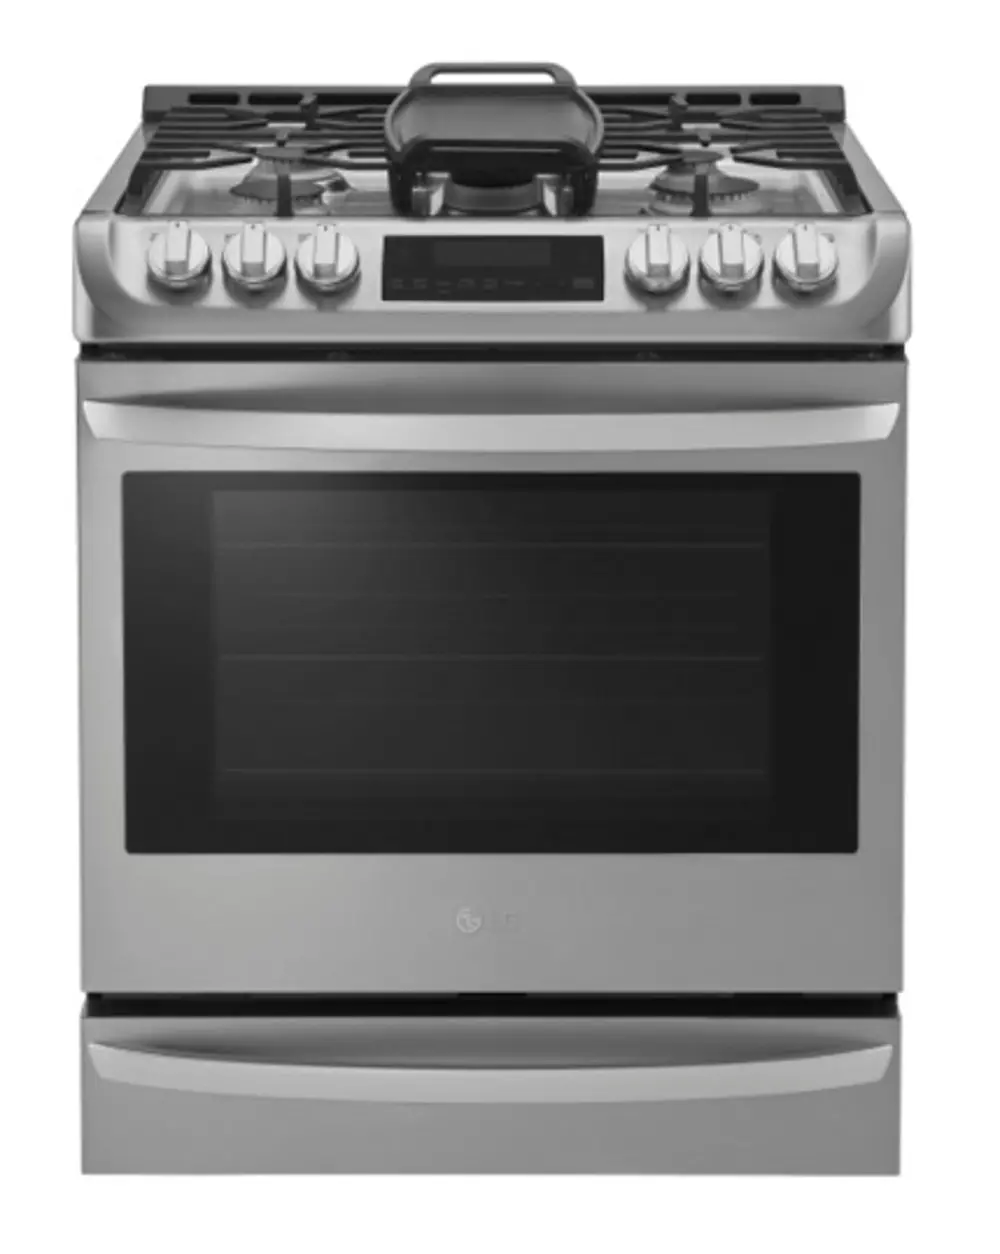 LSG4513ST LG Gas Range with ProBake convection - 6.3 cu. ft. Stainless Steel-1